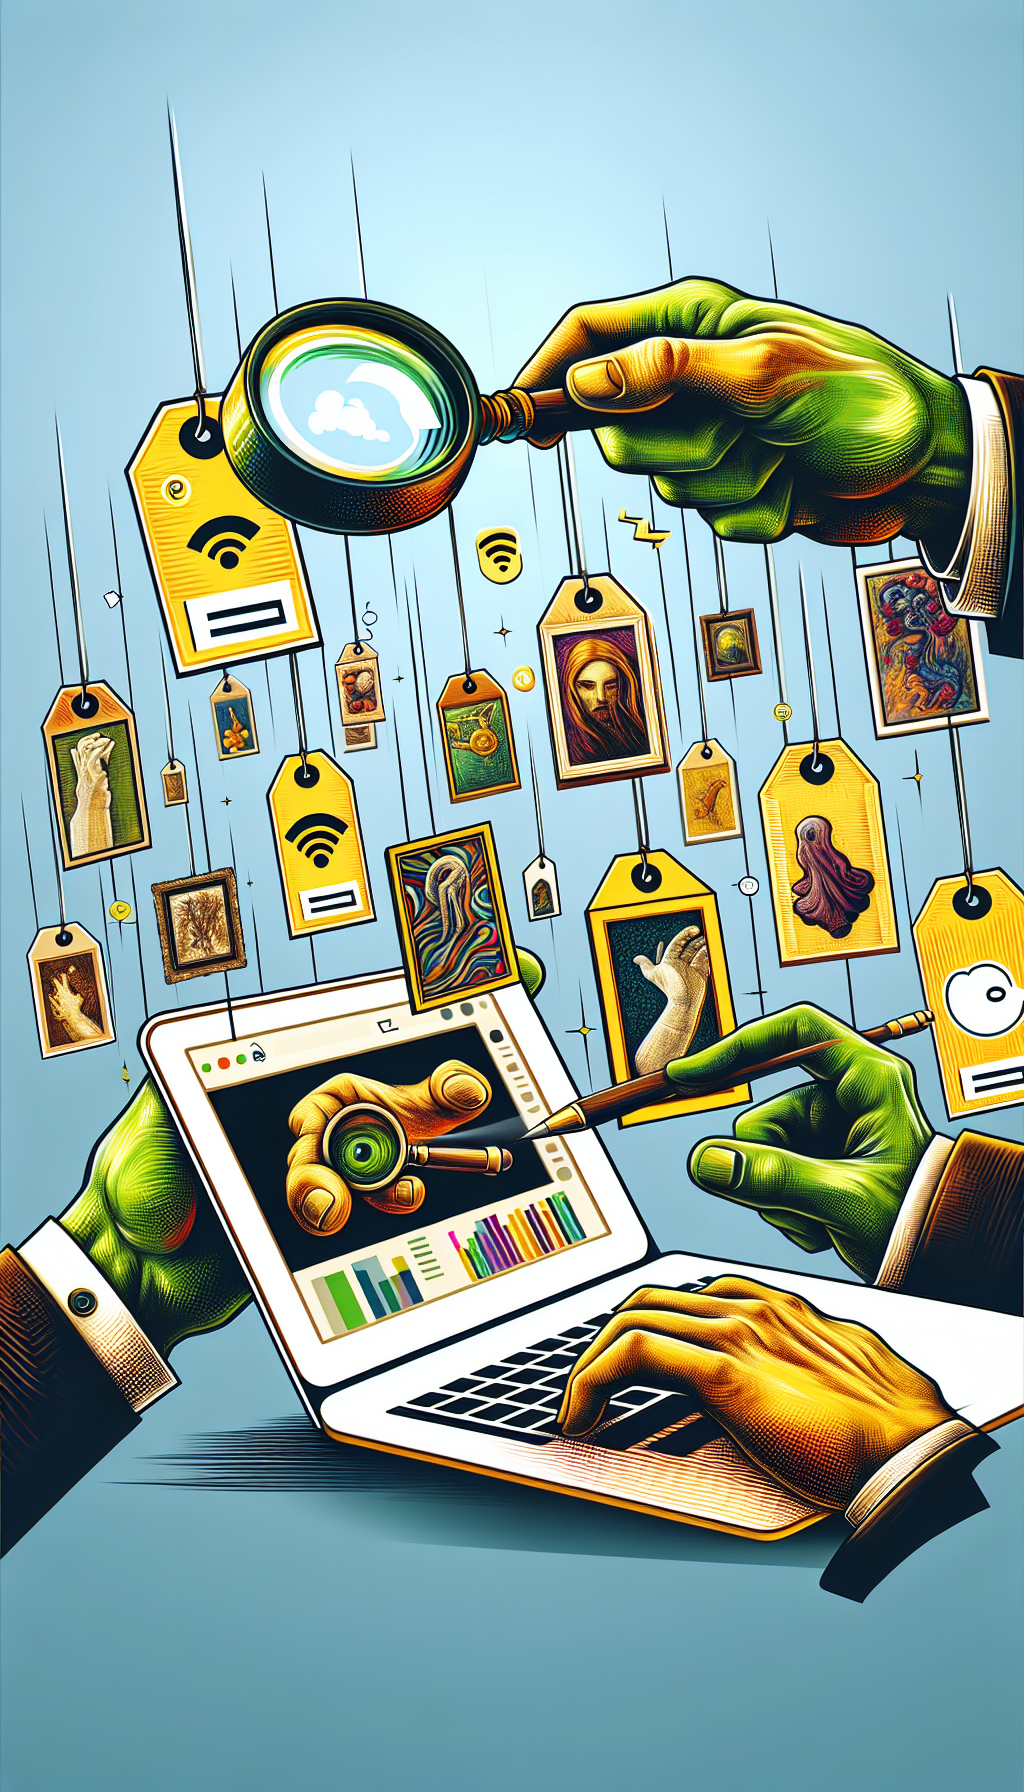 A playful, vibrant digital illustration shows an artist's hand reaching out from a computer screen, holding a magnifying glass to assess a diverse array of art pieces that float in a cyberspace gallery. Stylized price tags dangle from each artwork with a "0" to denote the free service, subtly weaving in symbols of WiFi signals and cloud icons to emphasize the online aspect.